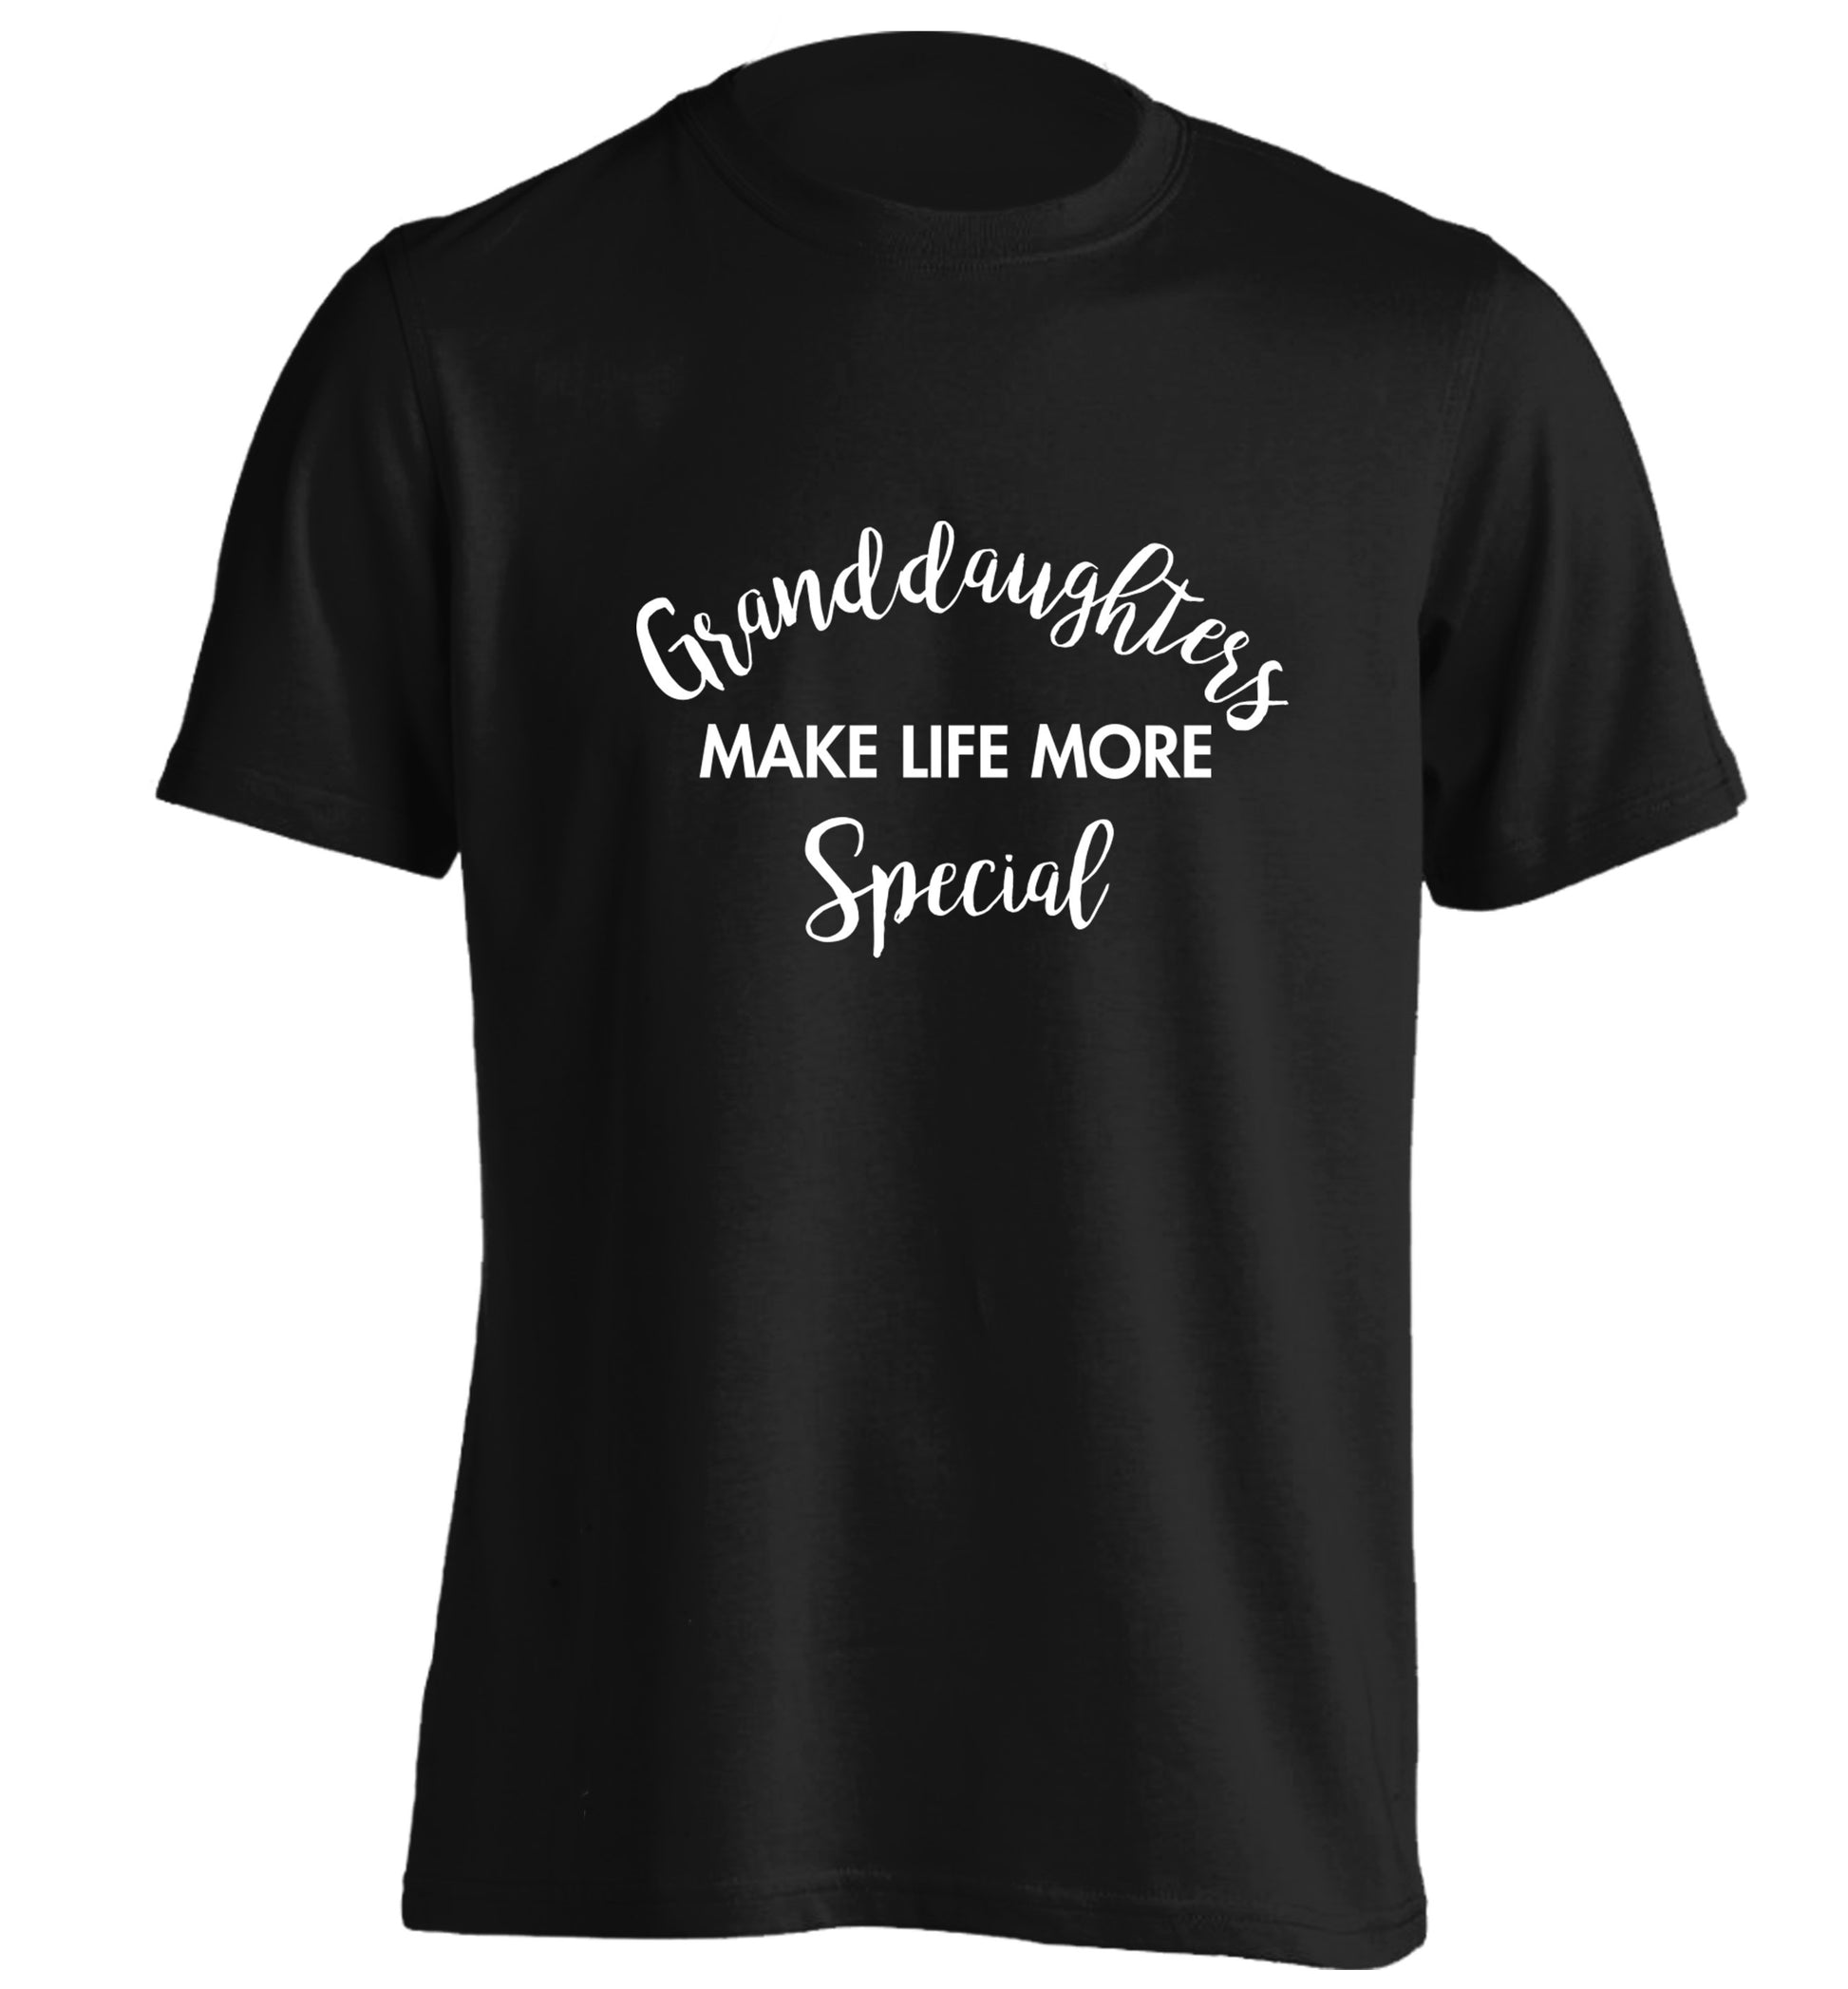 Granddaughters make life more special adults unisex black Tshirt 2XL